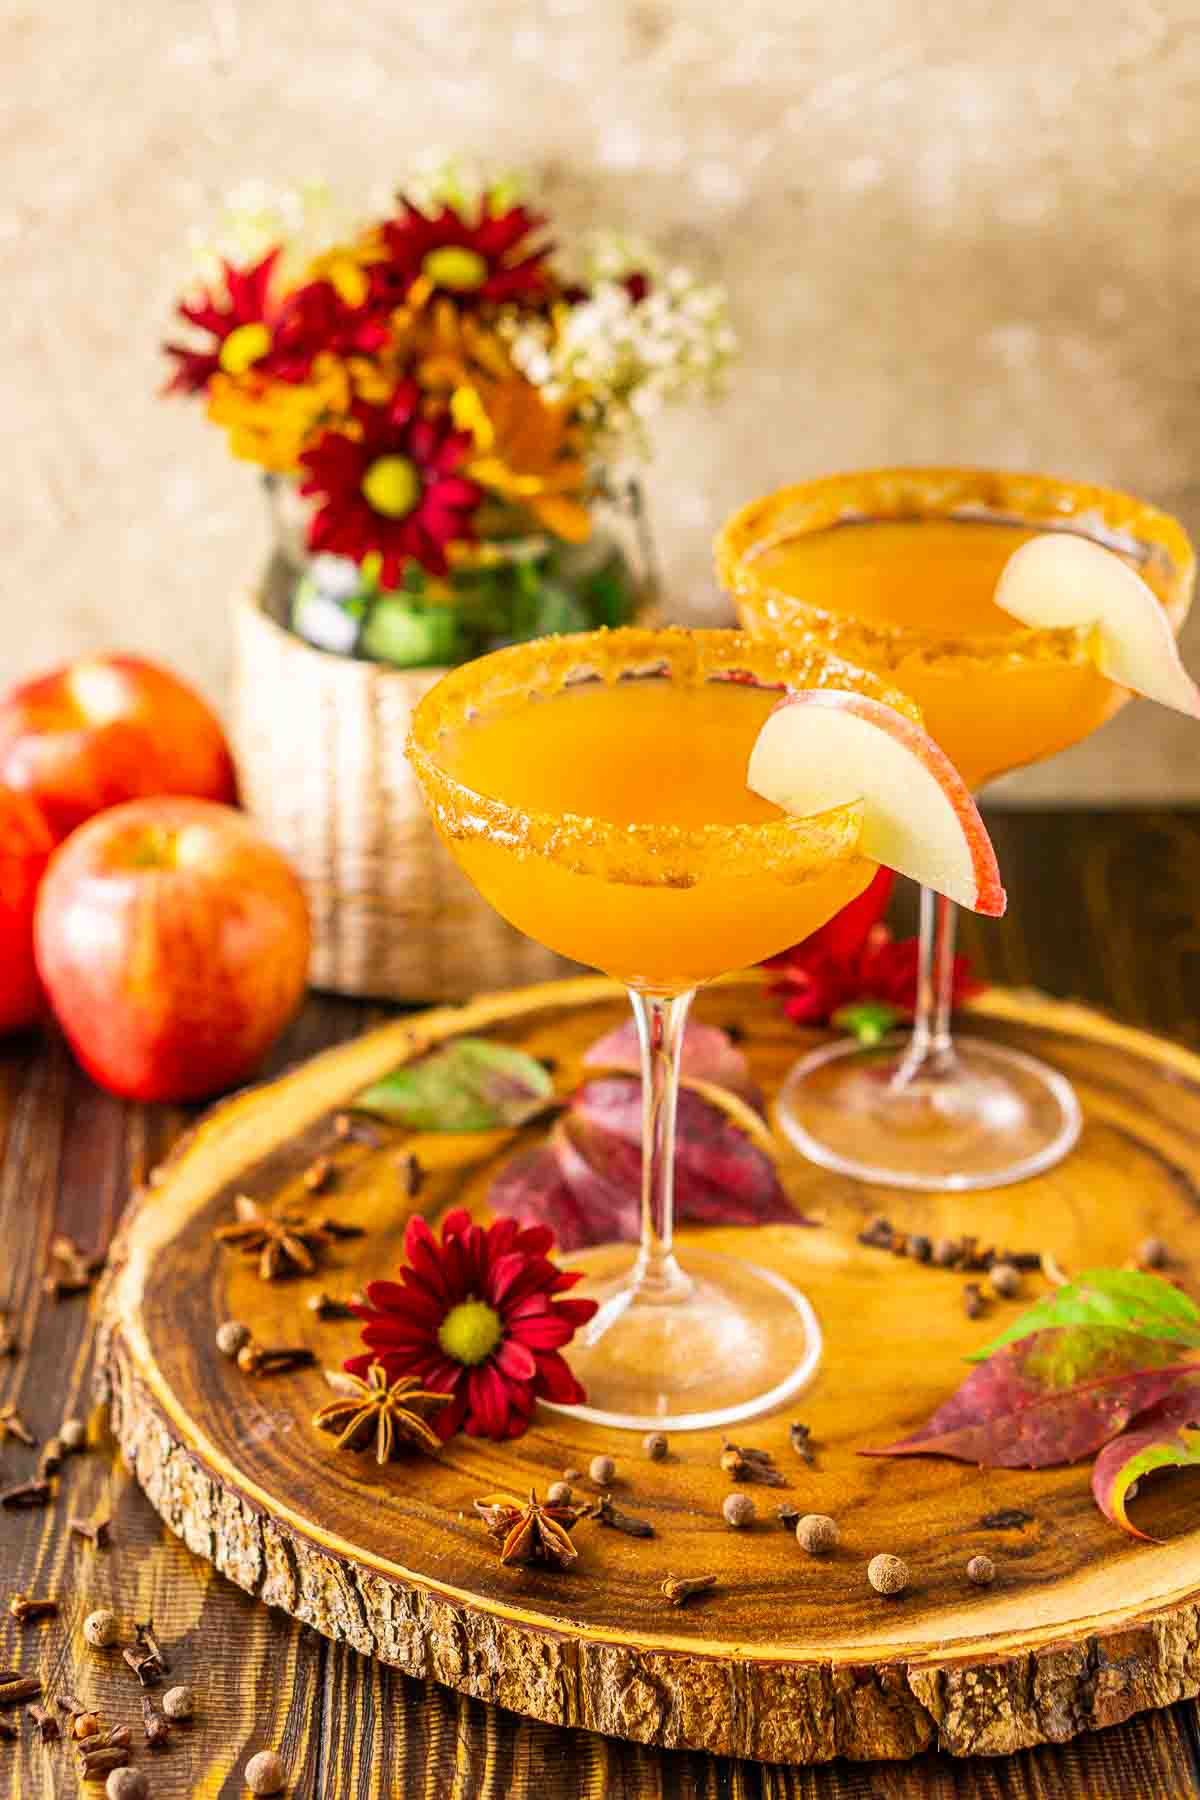 An apple cider martini on a wooden serving tray with fall flower and whole apples in the background.